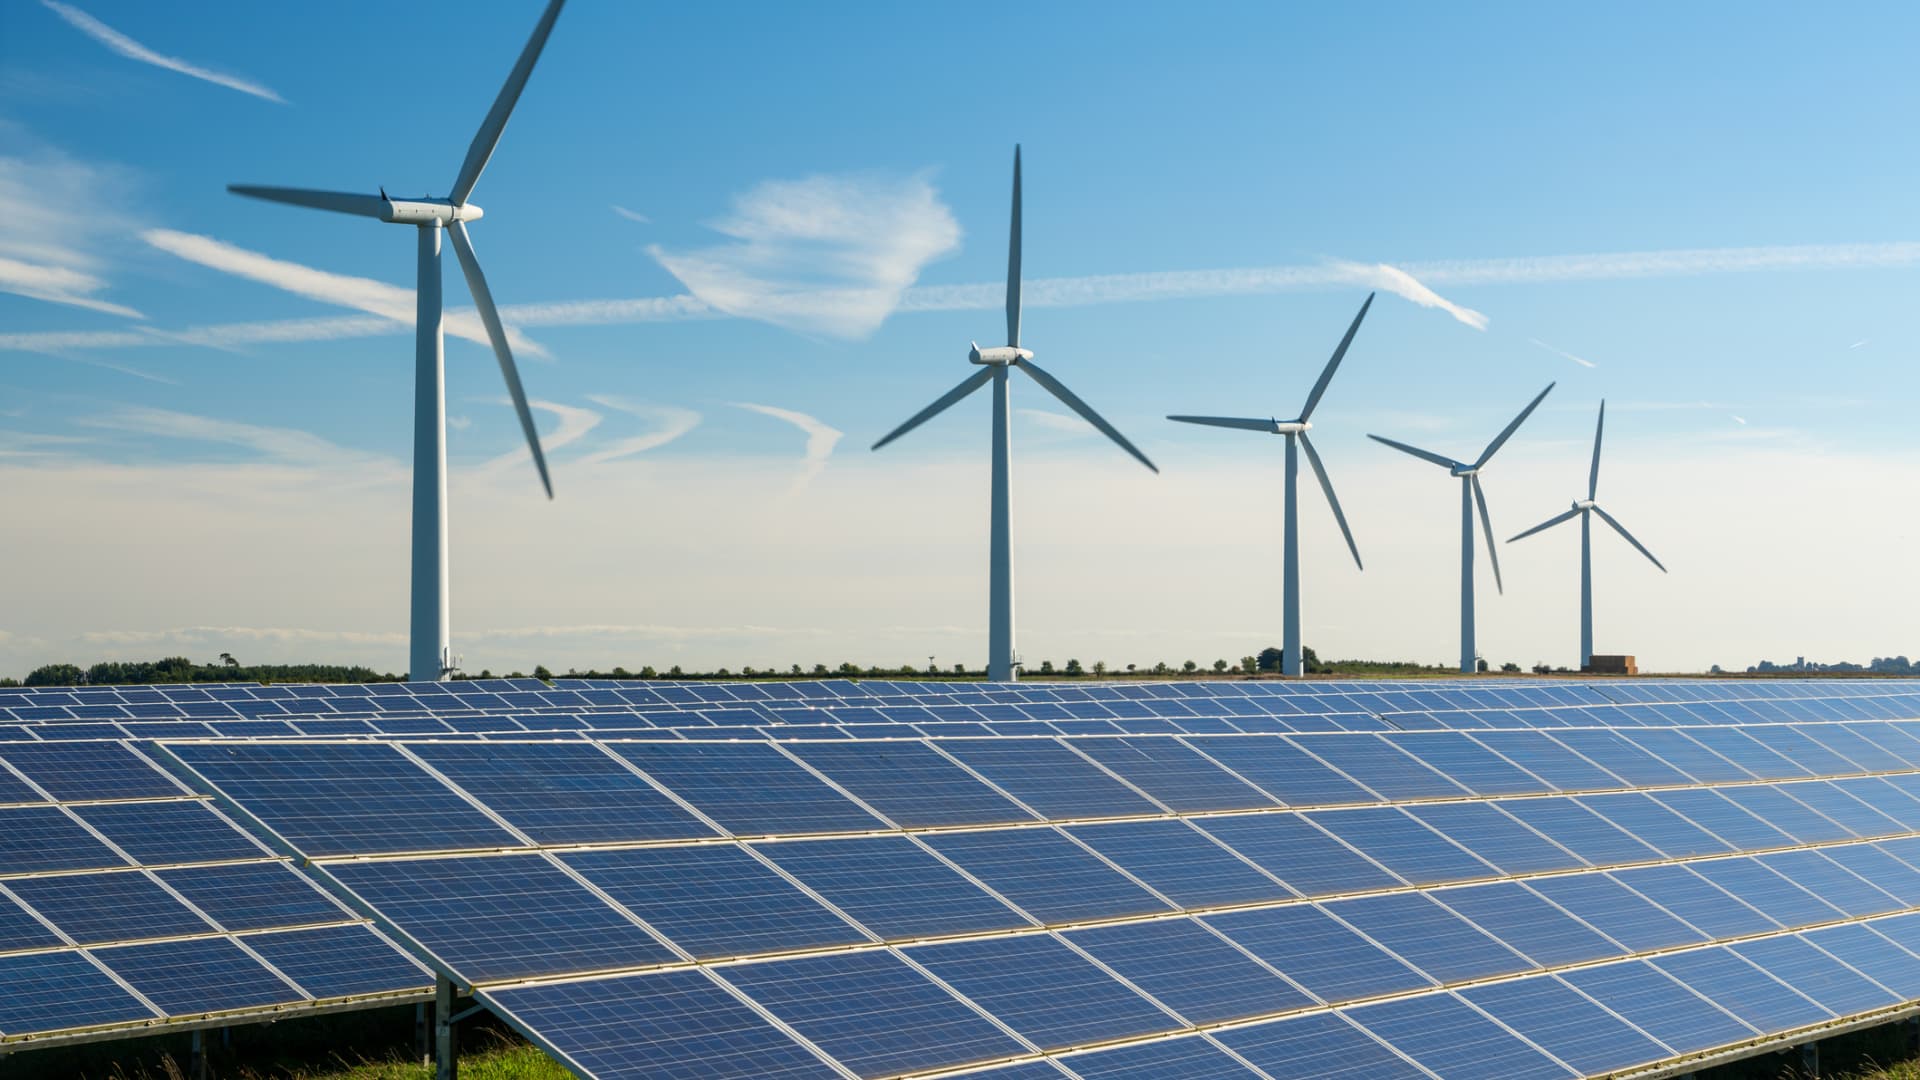 Analysts love these 3 renewable energy stocks that could see more than 50% upside